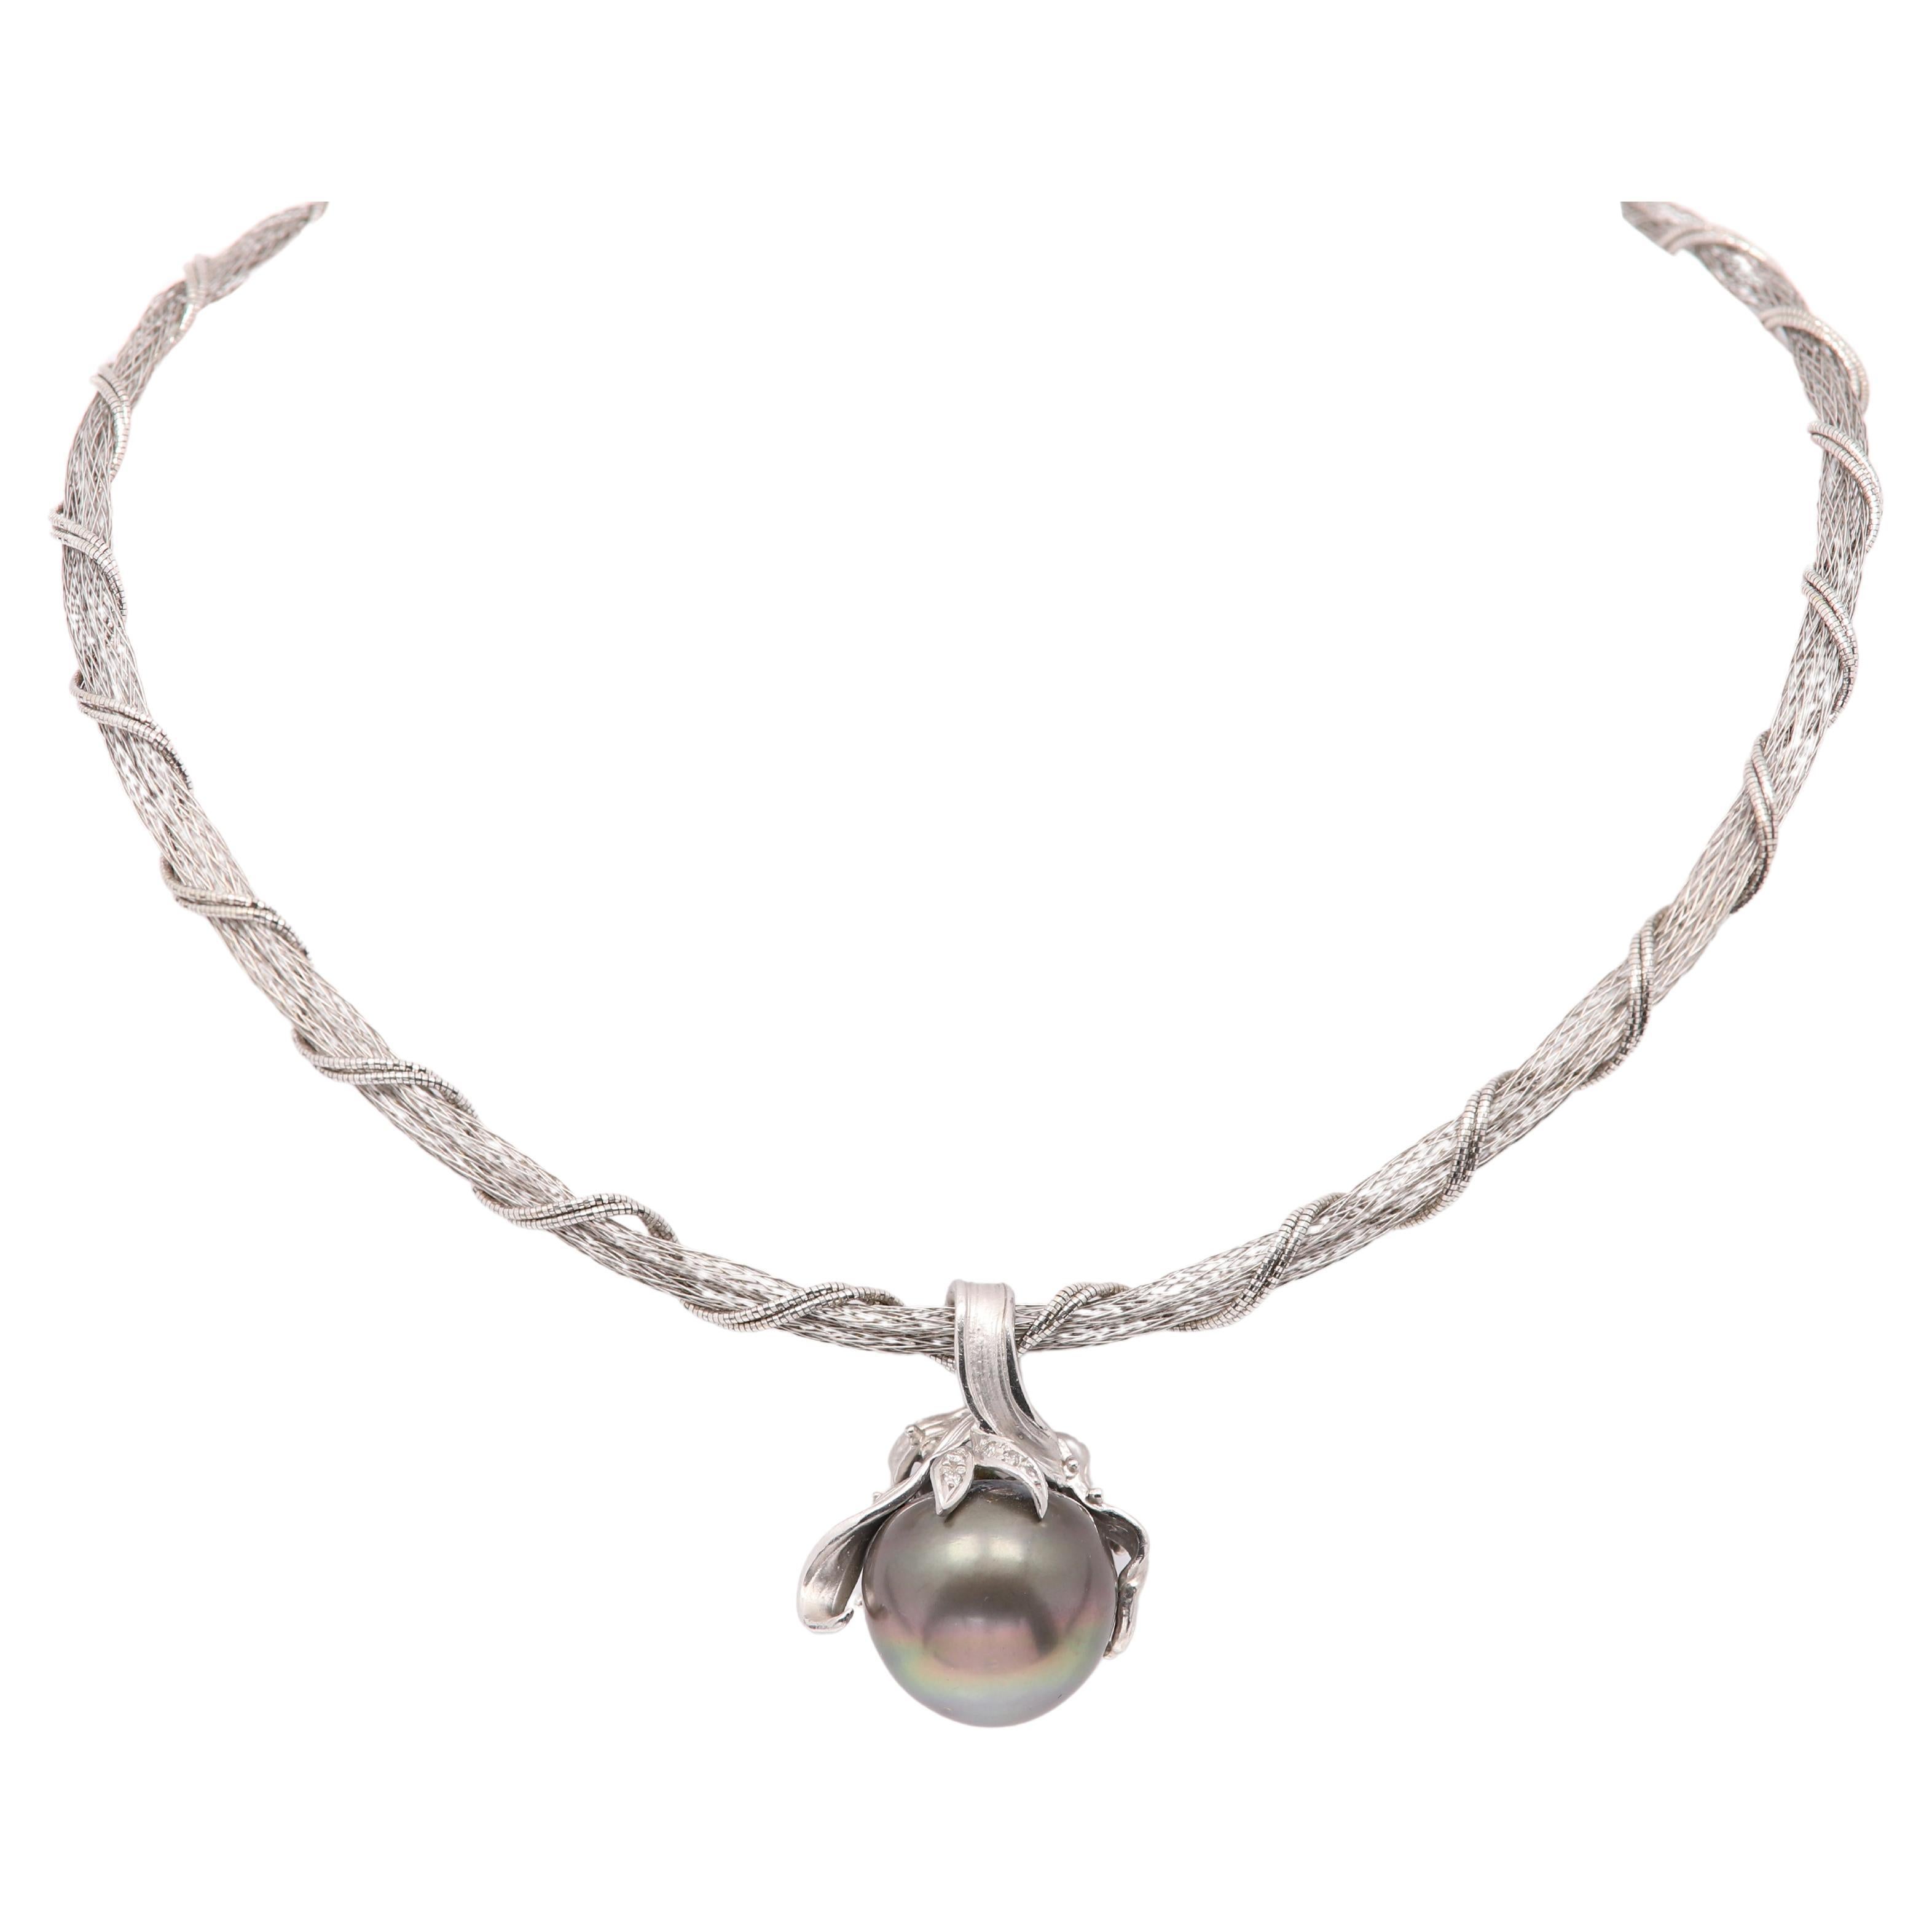 Large pearl Necklace 18 Karat White Gold and Platinum Large Grey South Sea Pearl For Sale